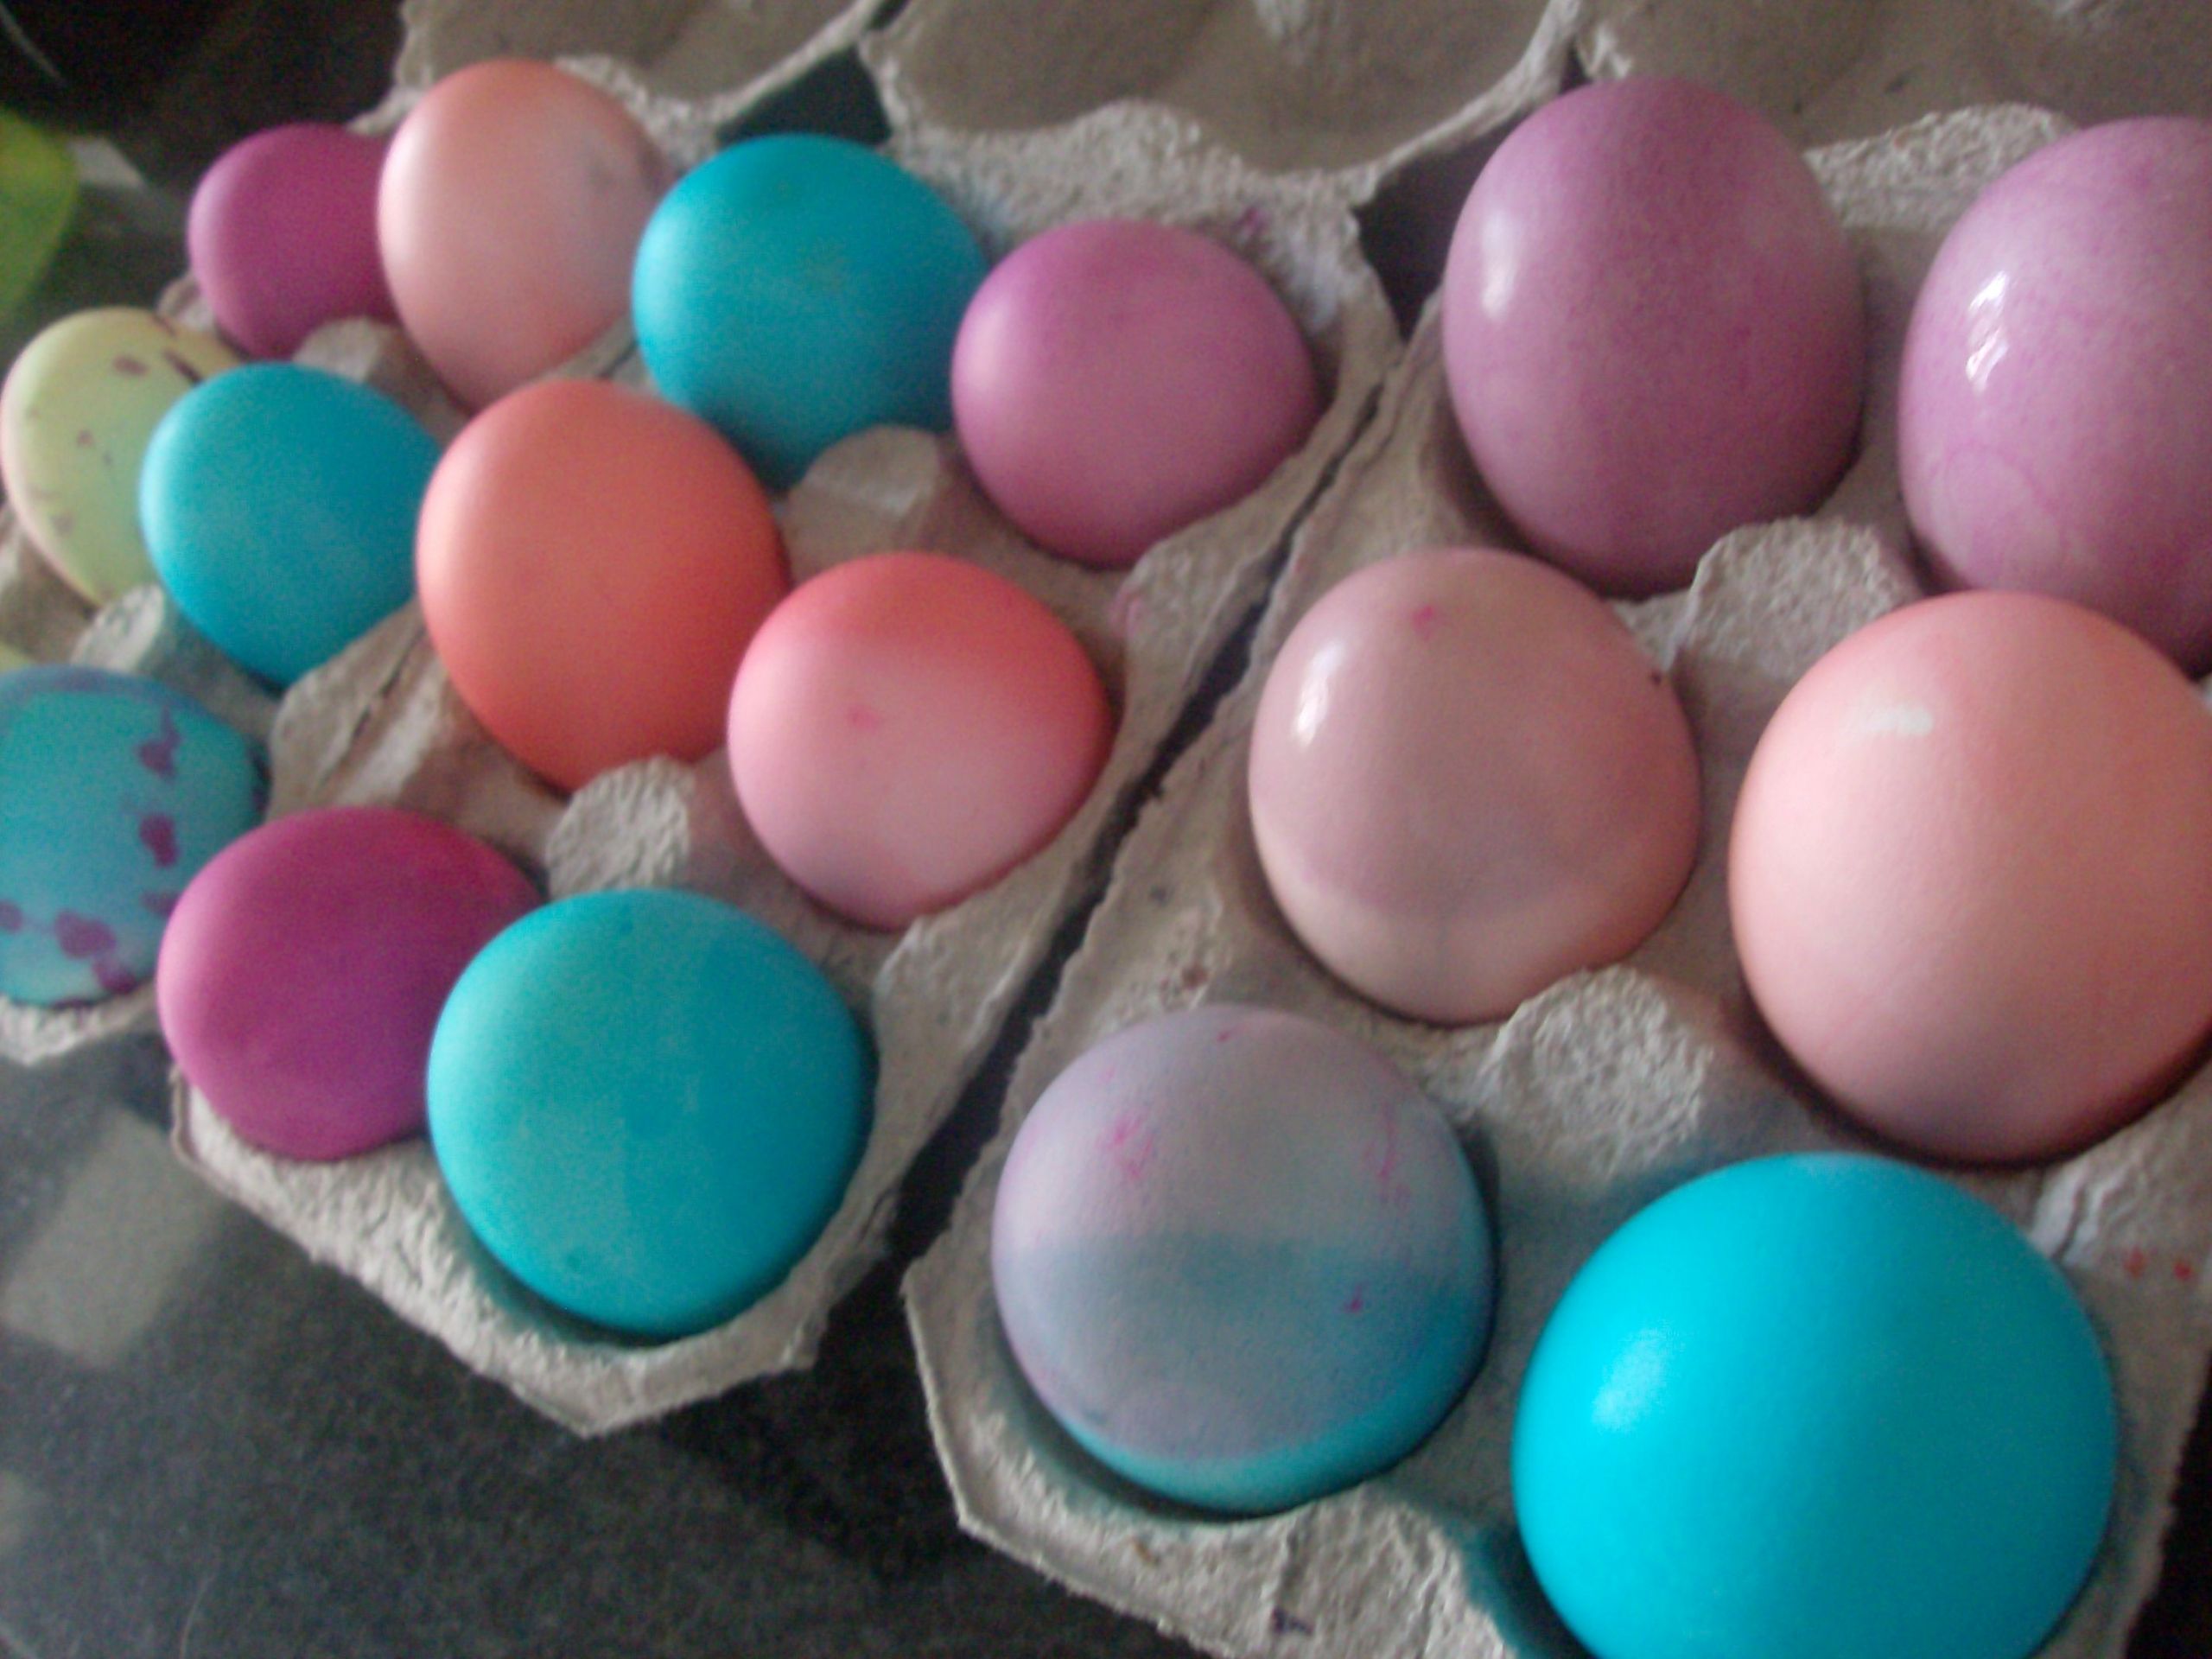 Coloring Easter Egg Ideas
 Dye Easter Eggs Frugally with Food Coloring Mommysavers